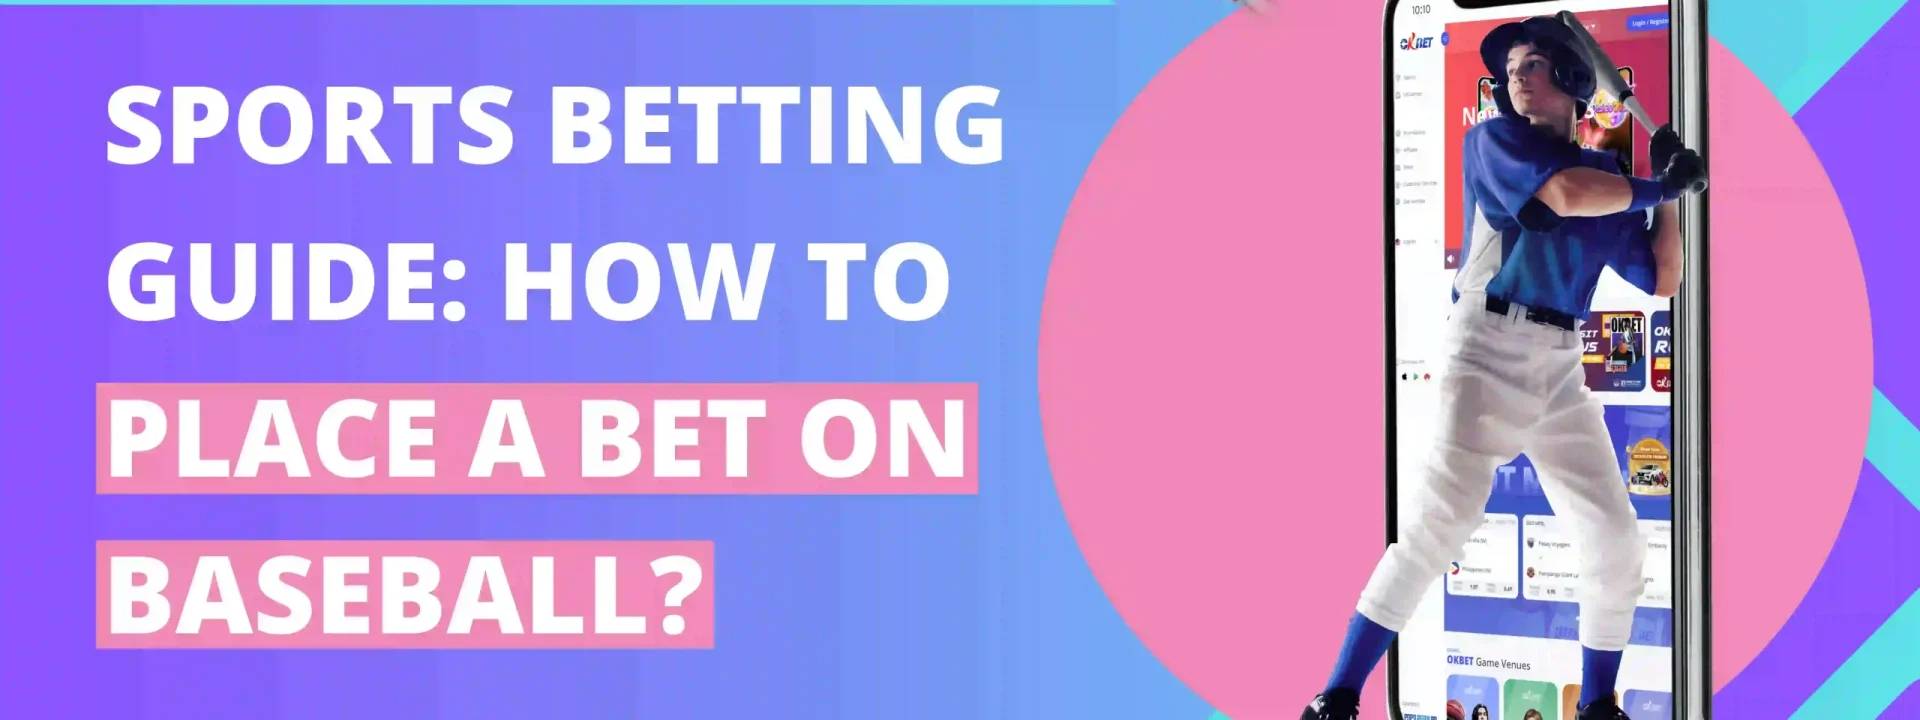 Sports Betting Guide How to Place a Bet on Baseball